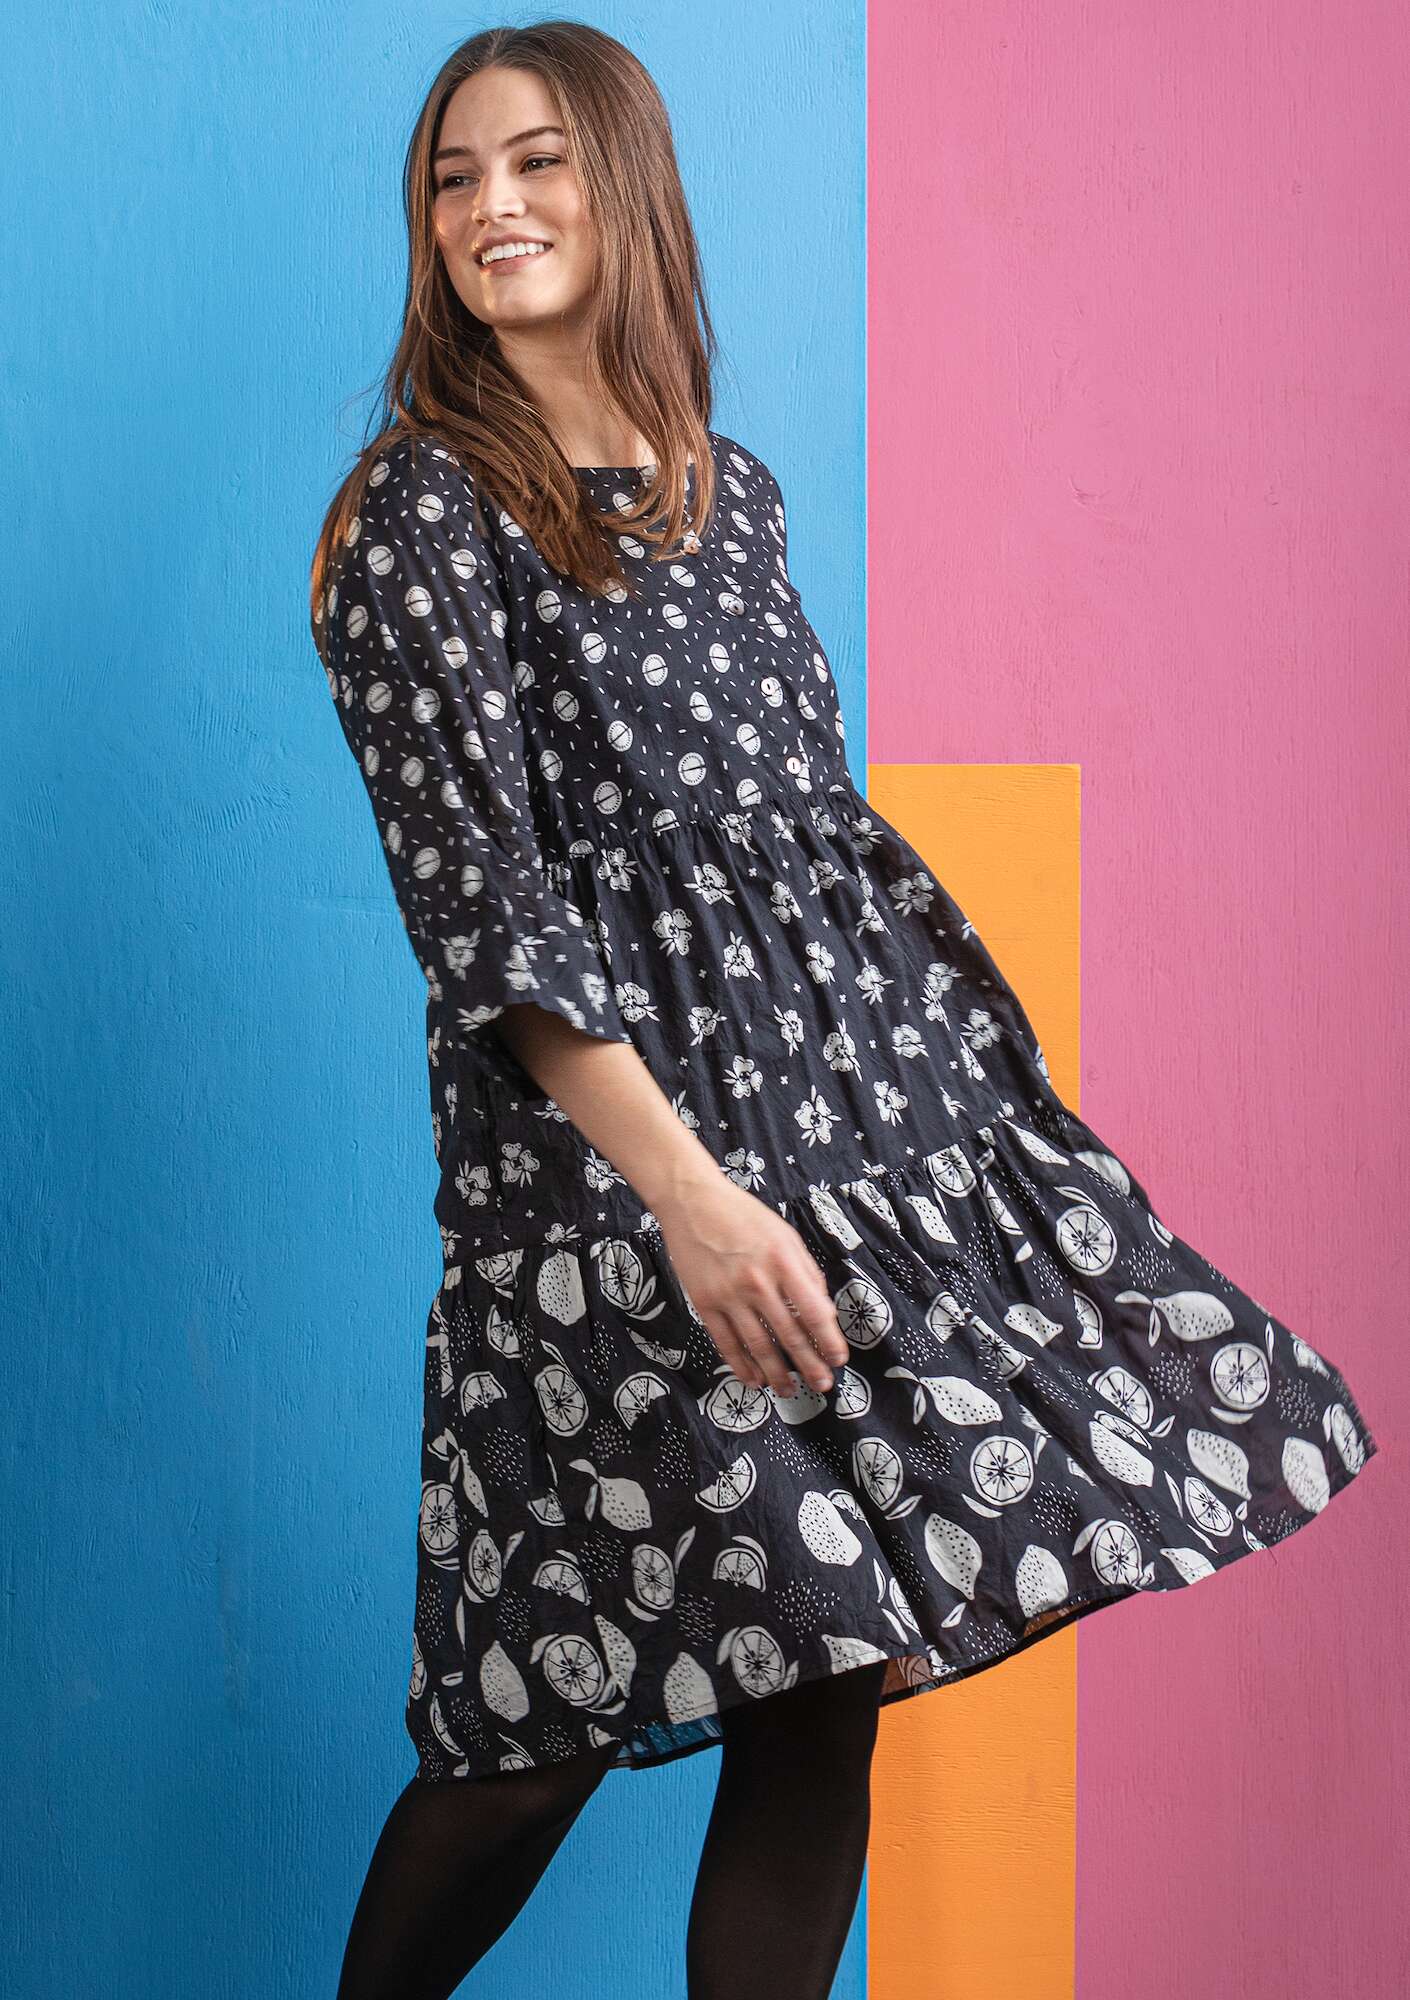 “Fruits” dress in woven organic/recycled cotton black/patterned thumbnail